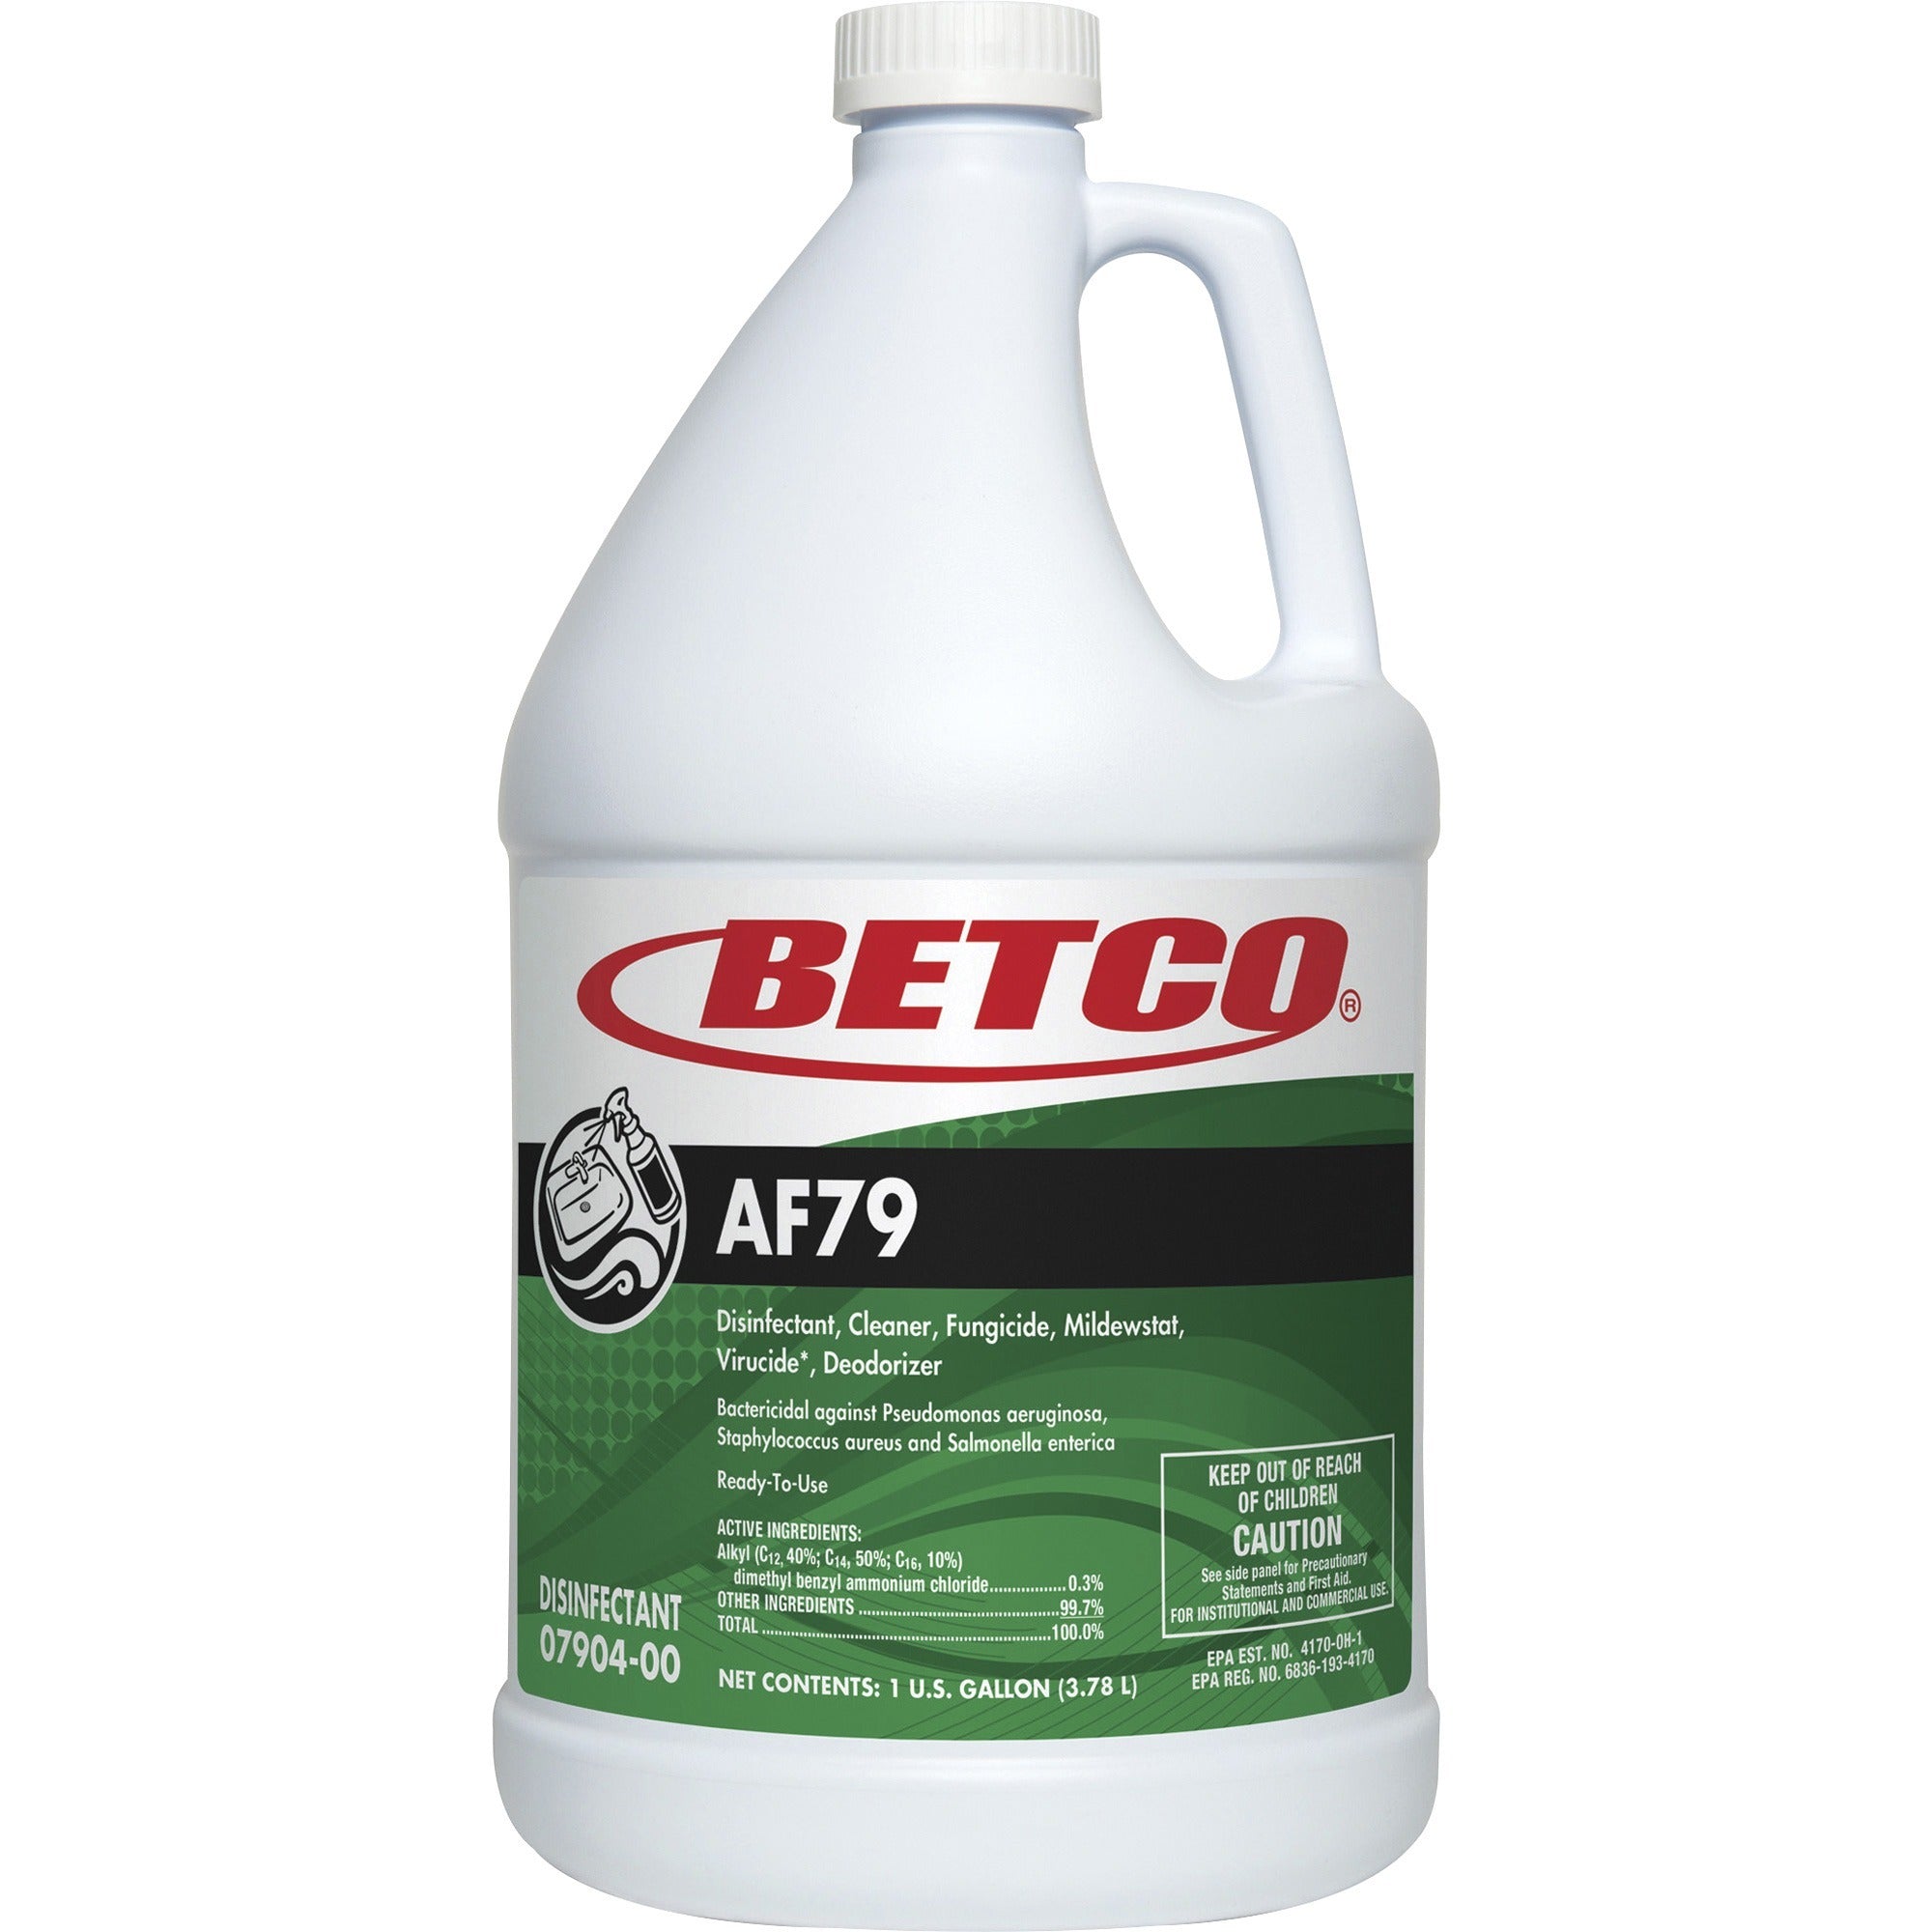 Betco AF79 Acid-Free Restroom Cleaner - Ready-To-Use - 128 fl oz (4 quart) - Citrus Bouquet Scent - 1 Each - Disinfectant, Deodorize, Long Lasting, Rinse-free - Clear Blue - 1